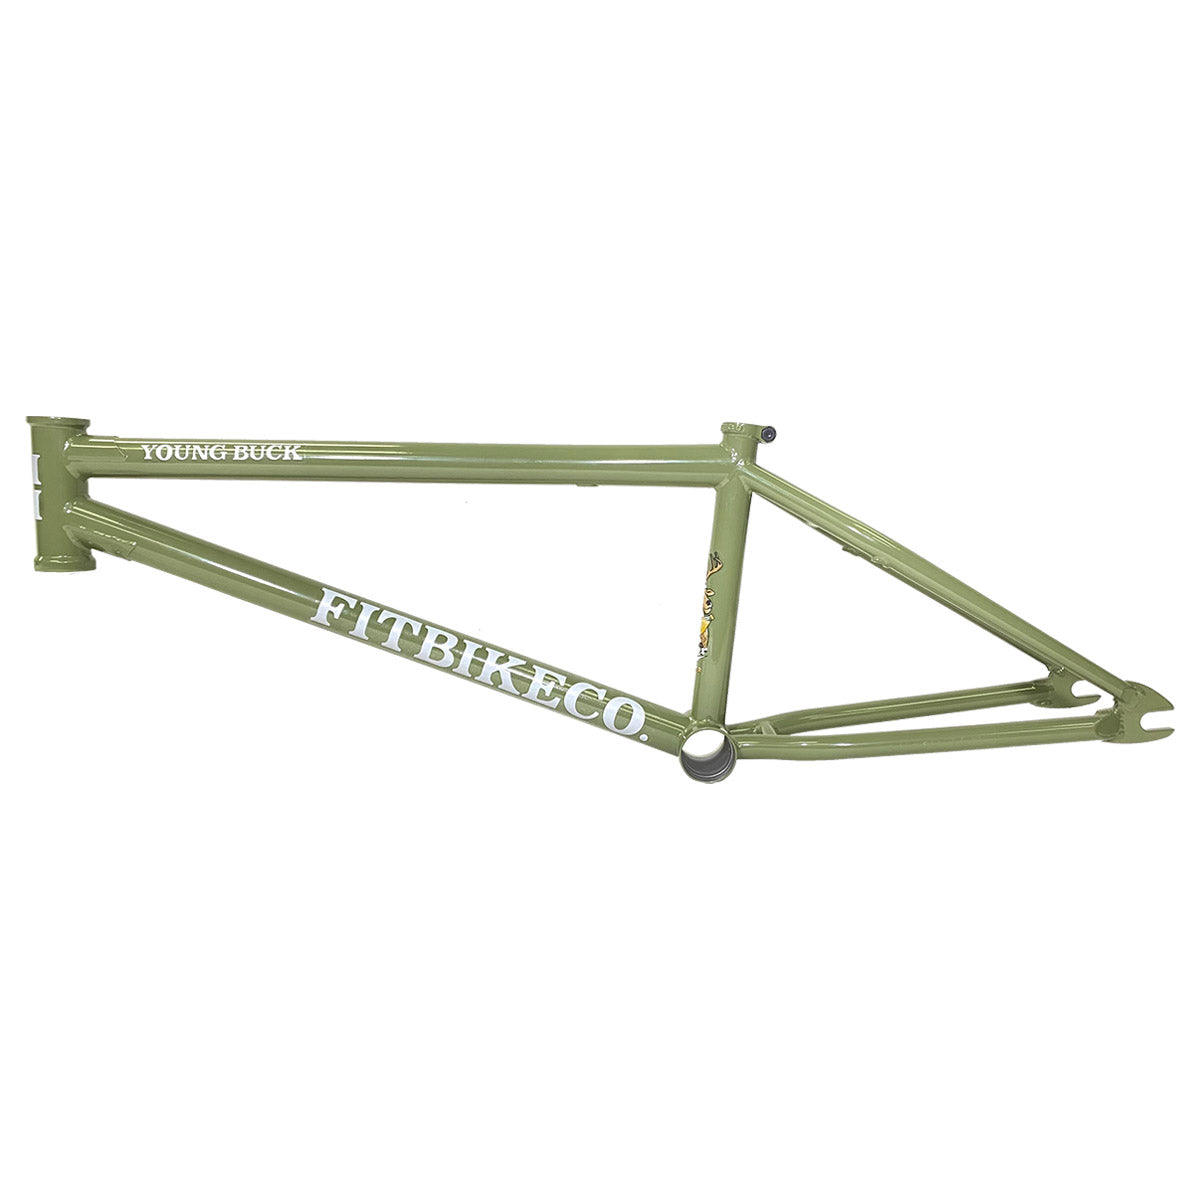 FITBIKECO YOUNG BUCK FRAME (MAX MILLER COLORWAY)